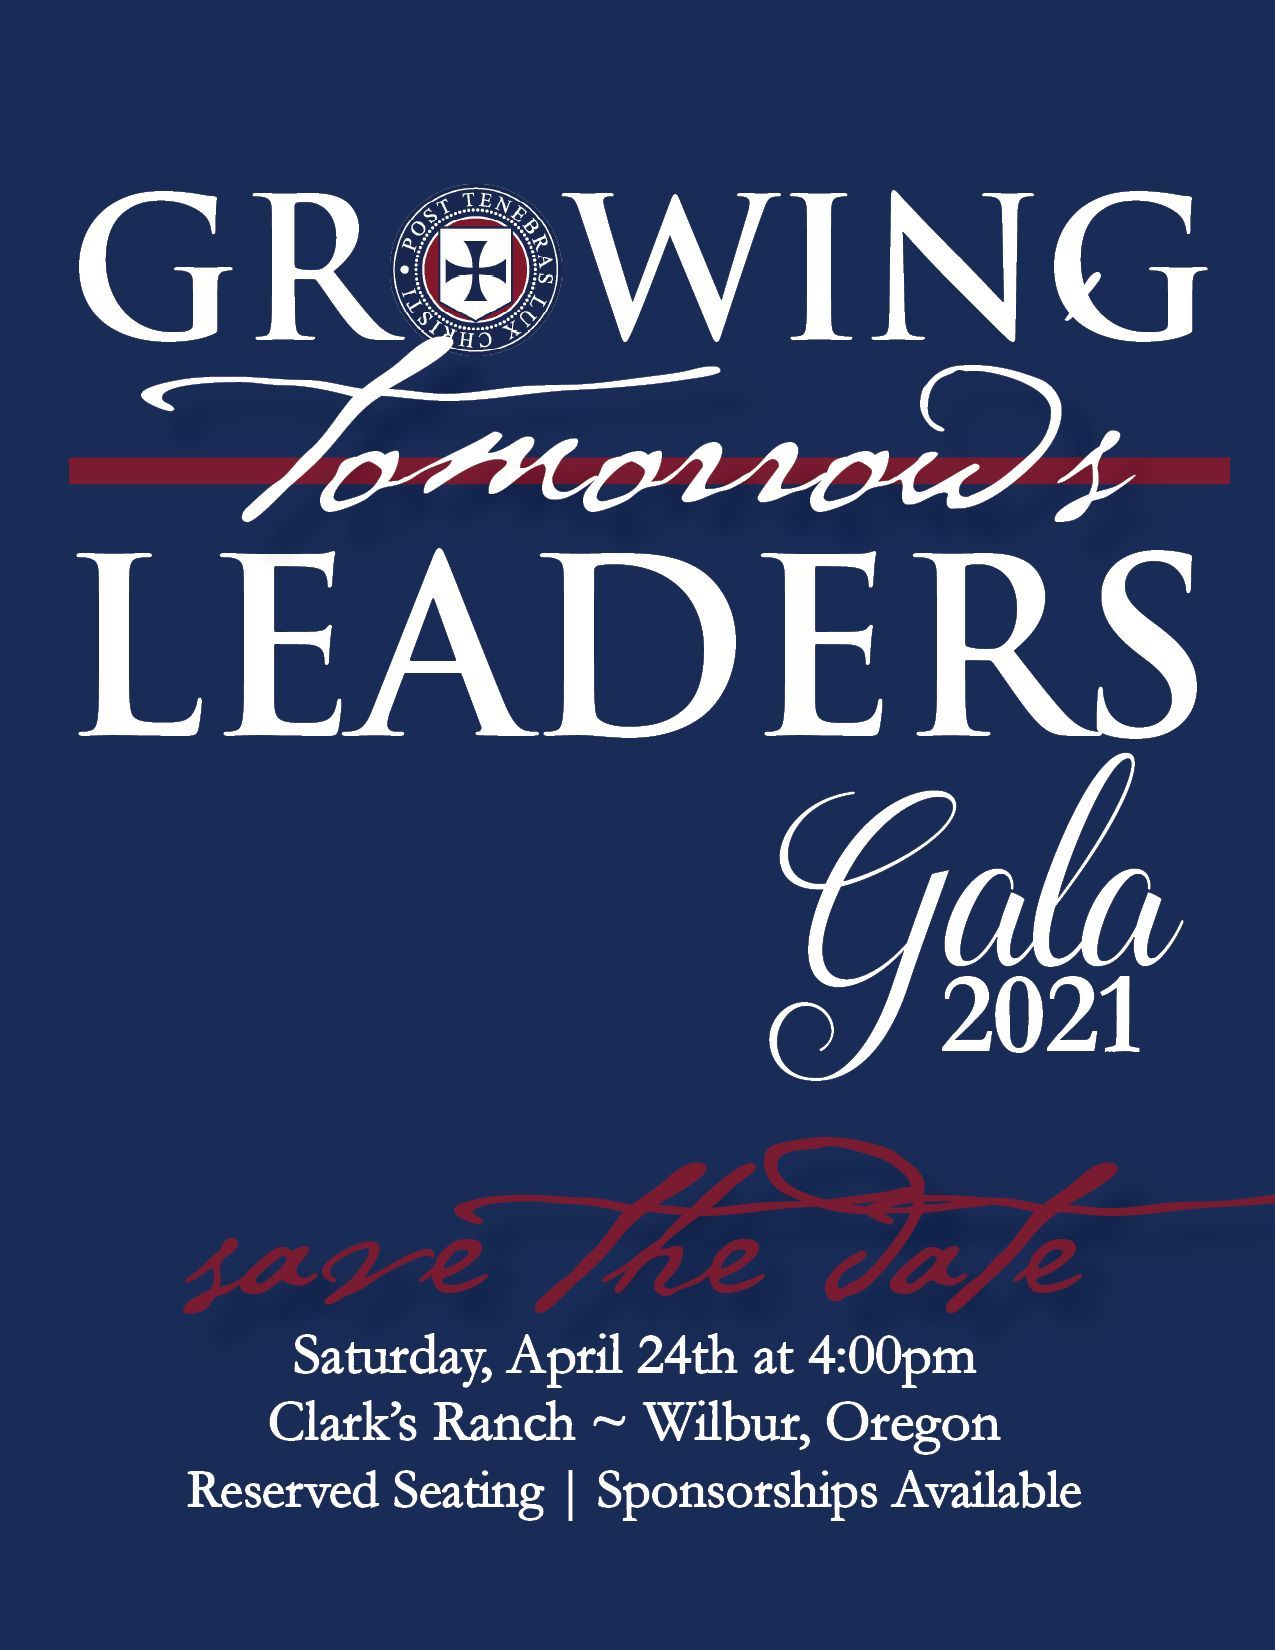 Geneva Gala is April 24, 2021 ~ Save the Date!